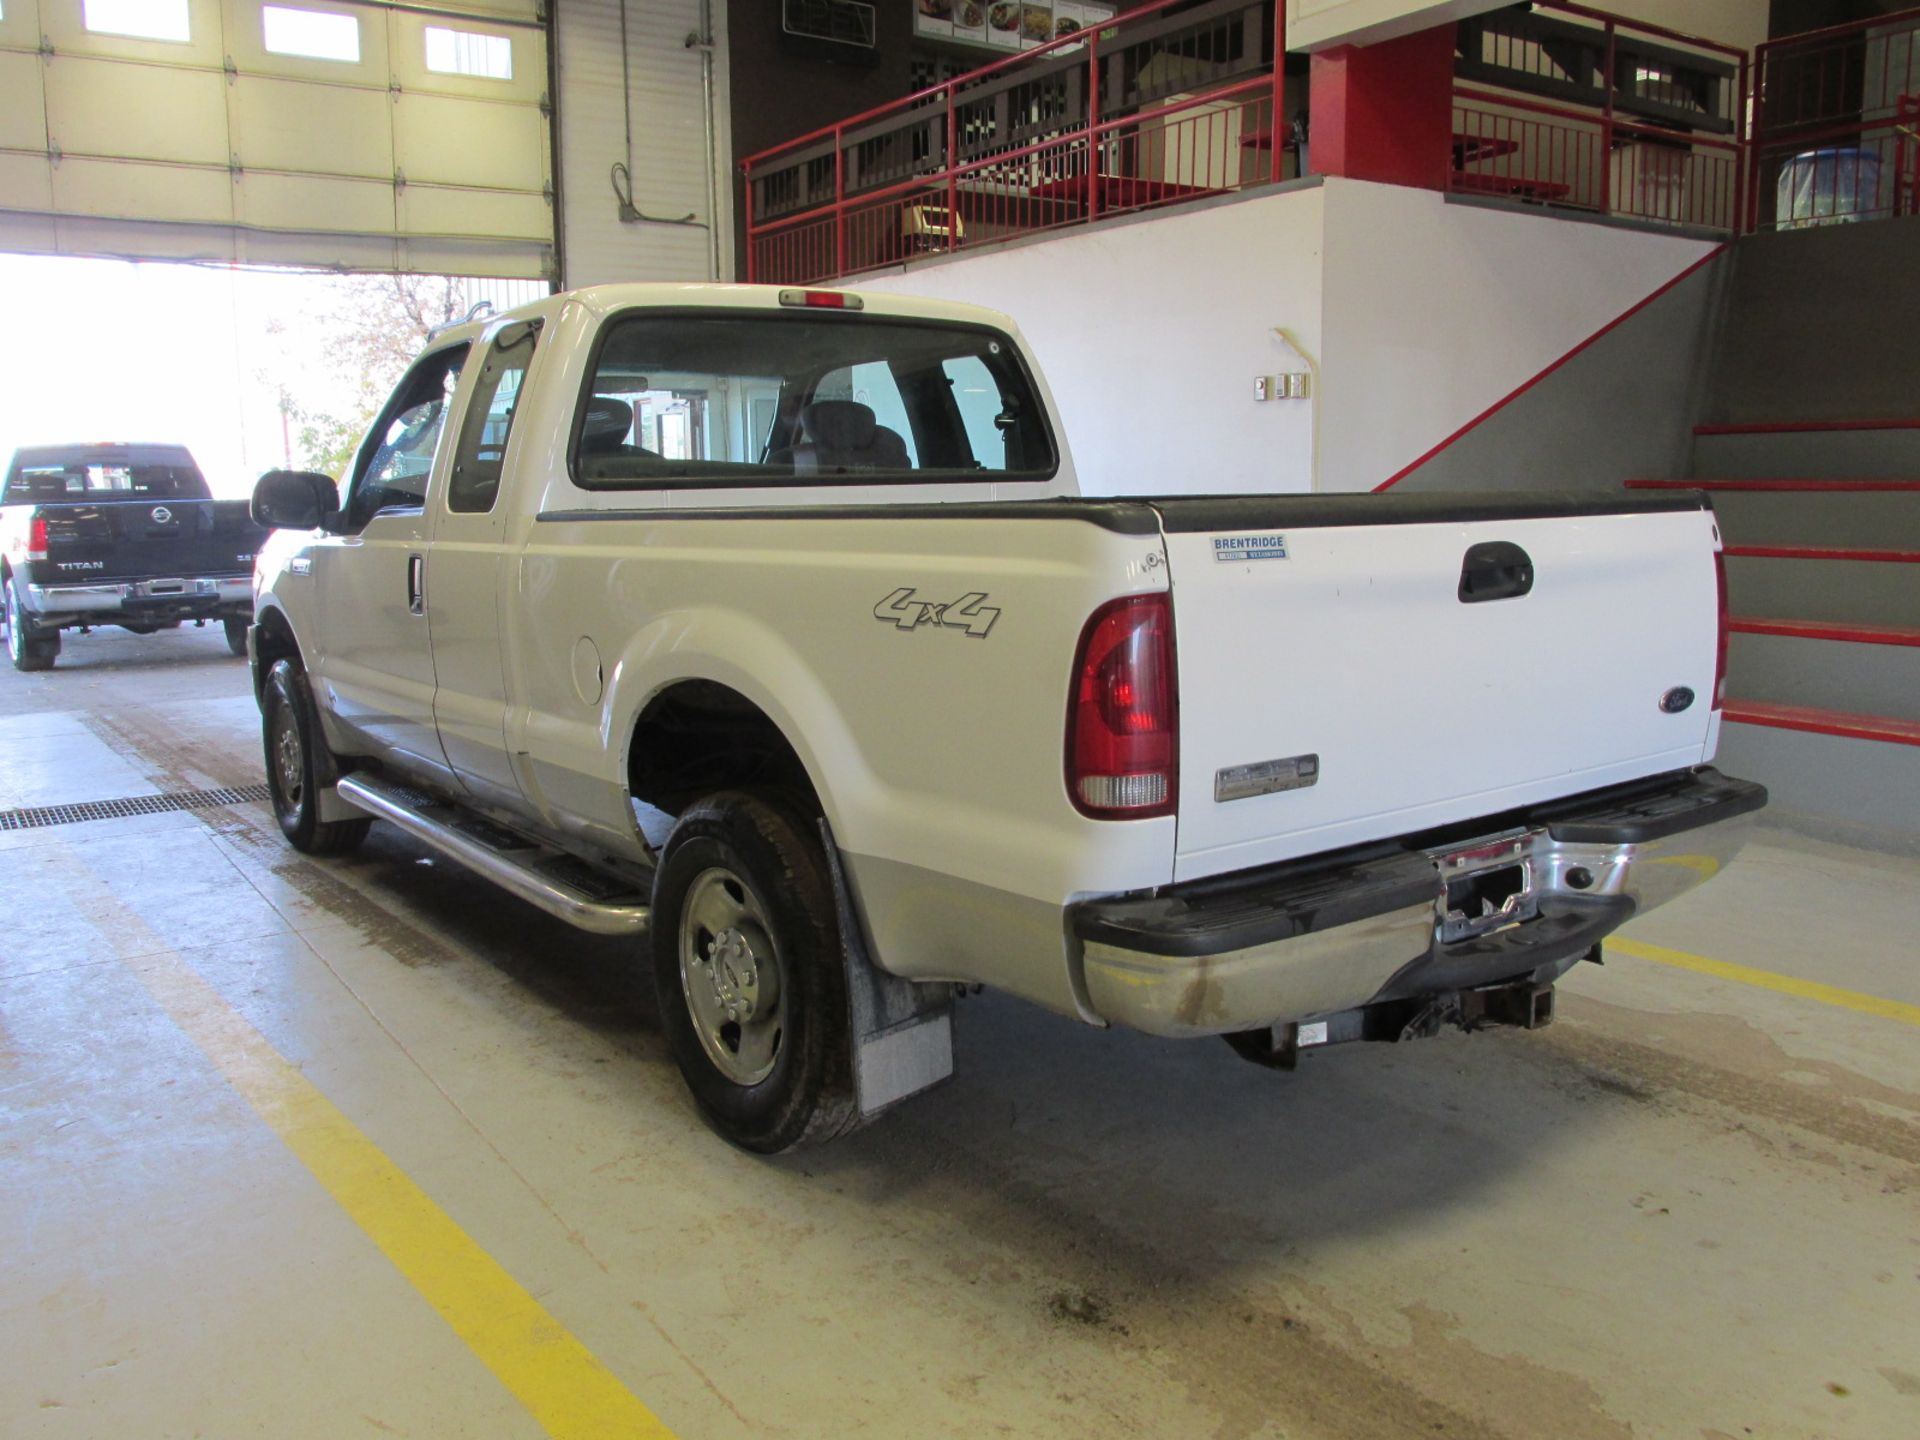 2006 FORD F-250 SD XLT SUPERCAB 4WD 5.4L V8 SOHC 16V AUTOMATIC SN:1FTSX21516EB69806 OPTIONS:AC TW CC - Image 2 of 10